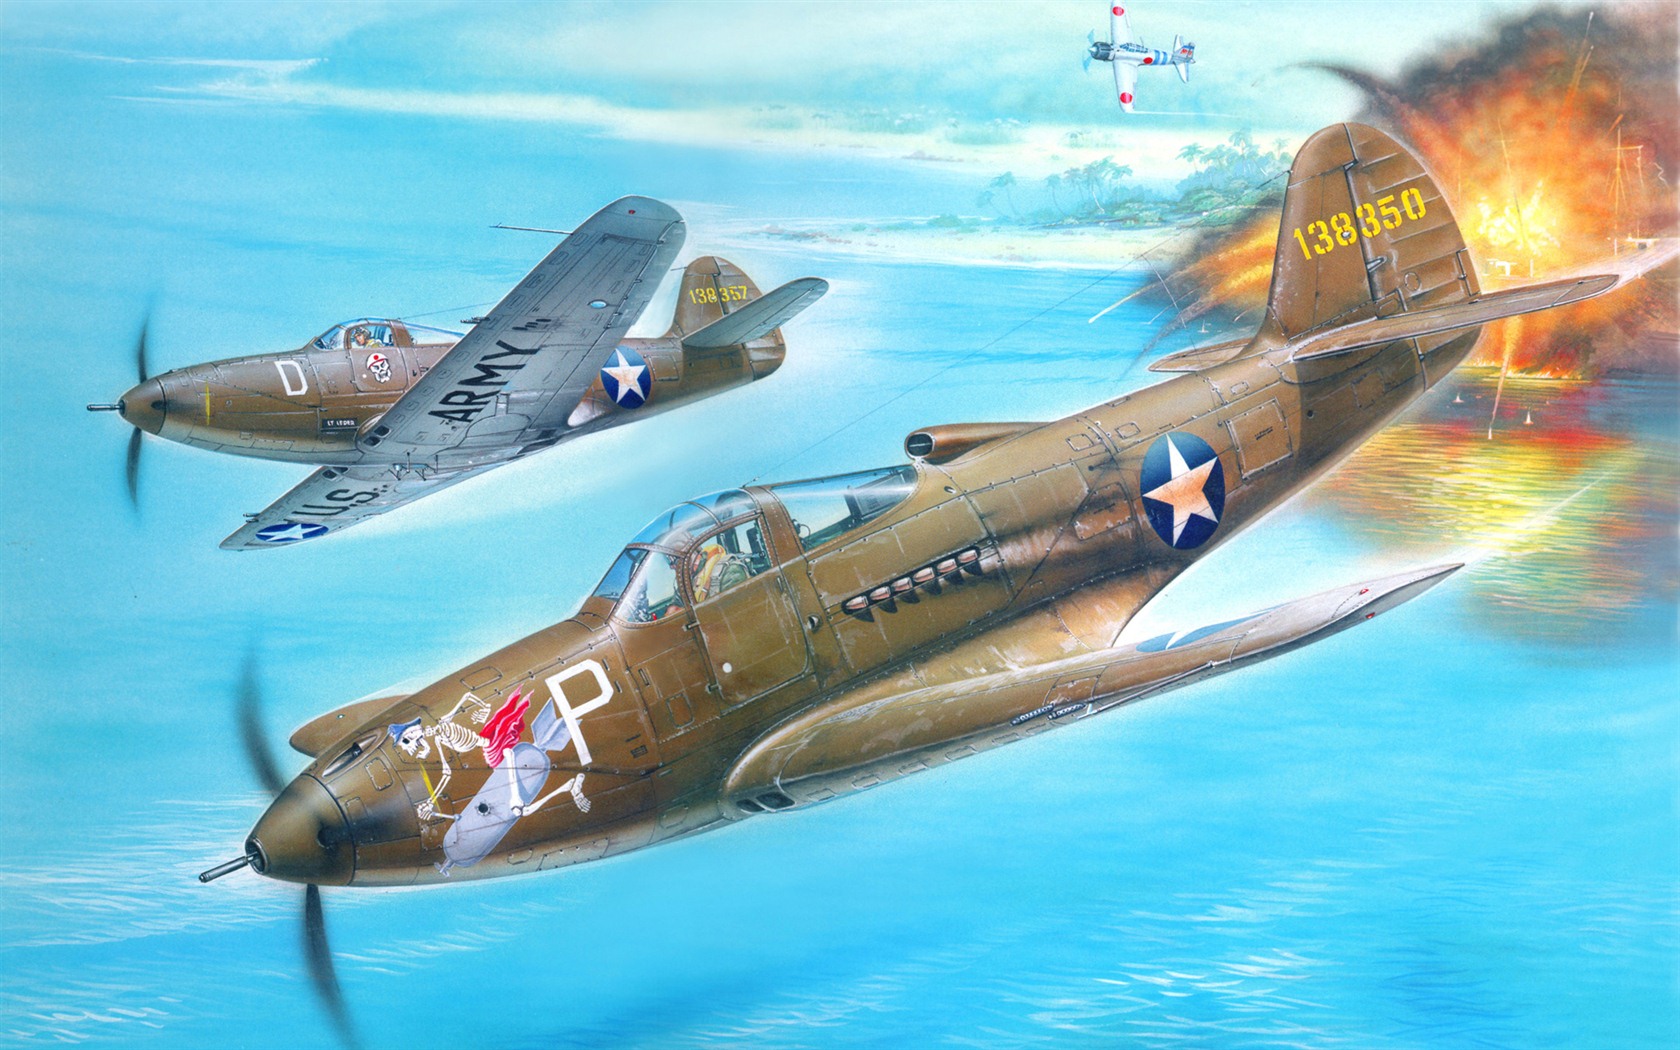 Military aircraft flight exquisite painting wallpapers #17 - 1680x1050